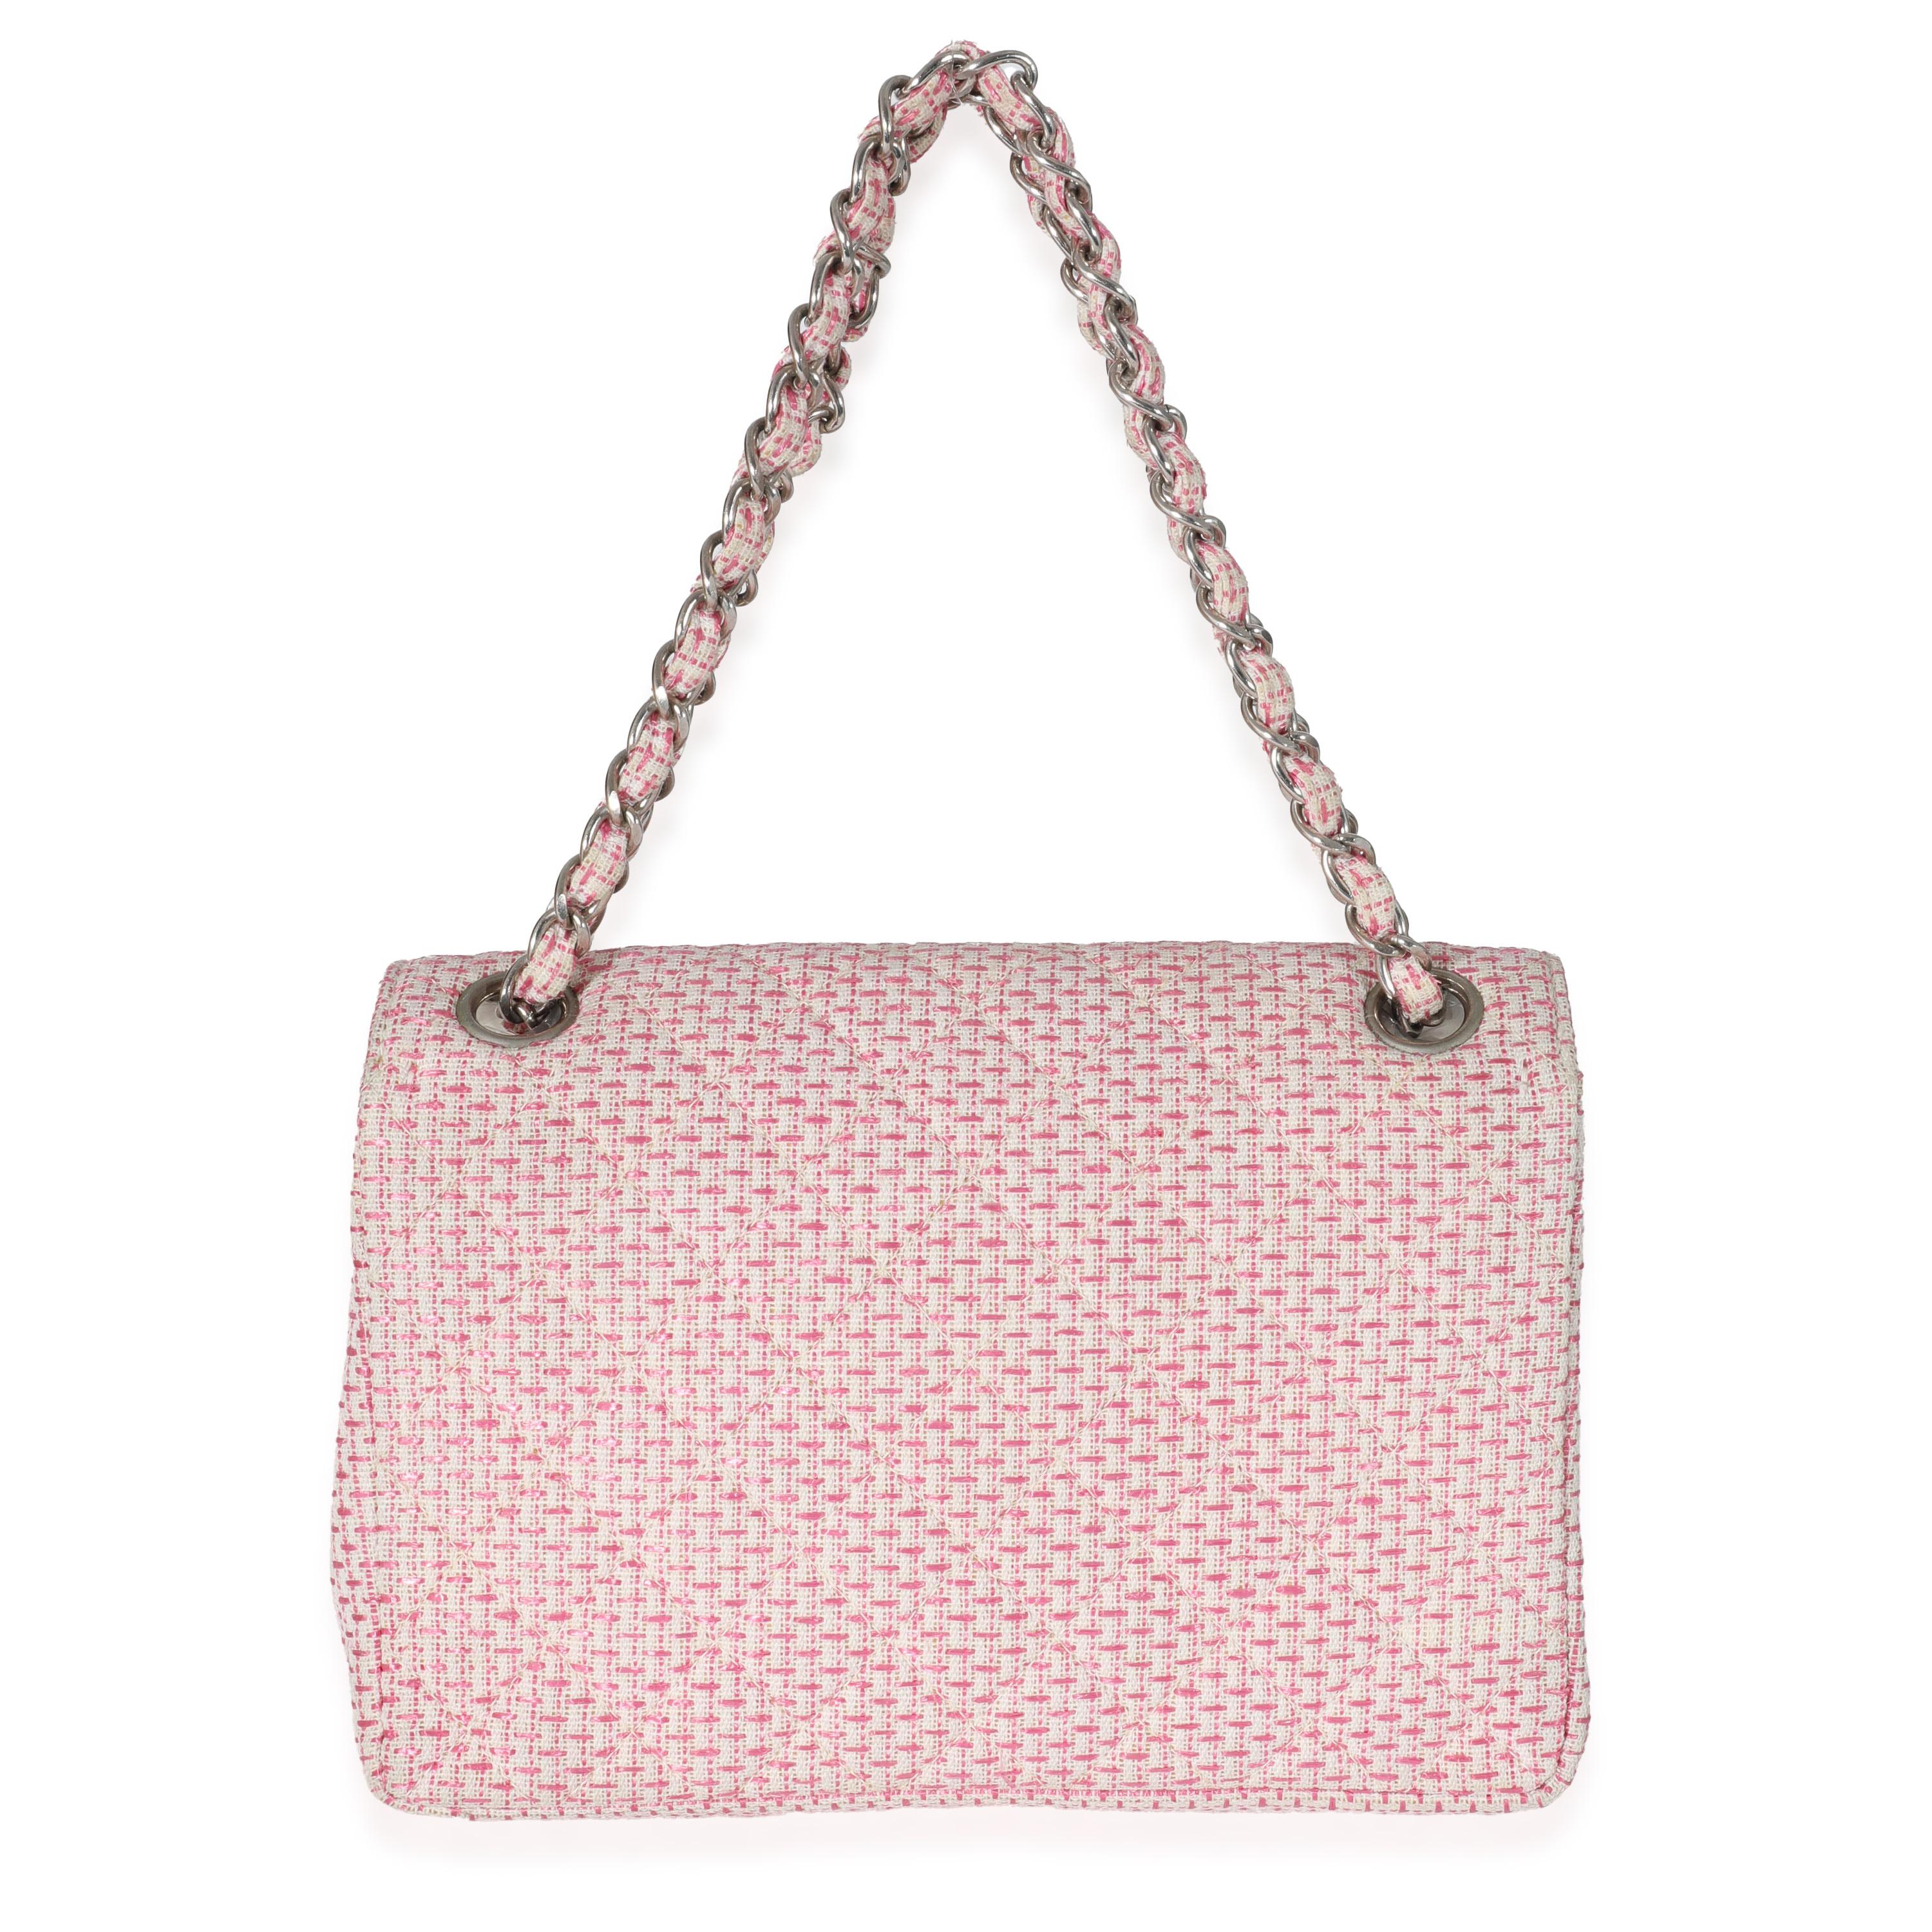 Listing Title: Chanel Woven Raffia Pink White Small CC Shoulder Flap Bag
SKU: 132127
Condition: Pre-owned 
Condition Description: A timeless classic that never goes out of style, the flap bag from Chanel dates back to 1955 and has seen a number of